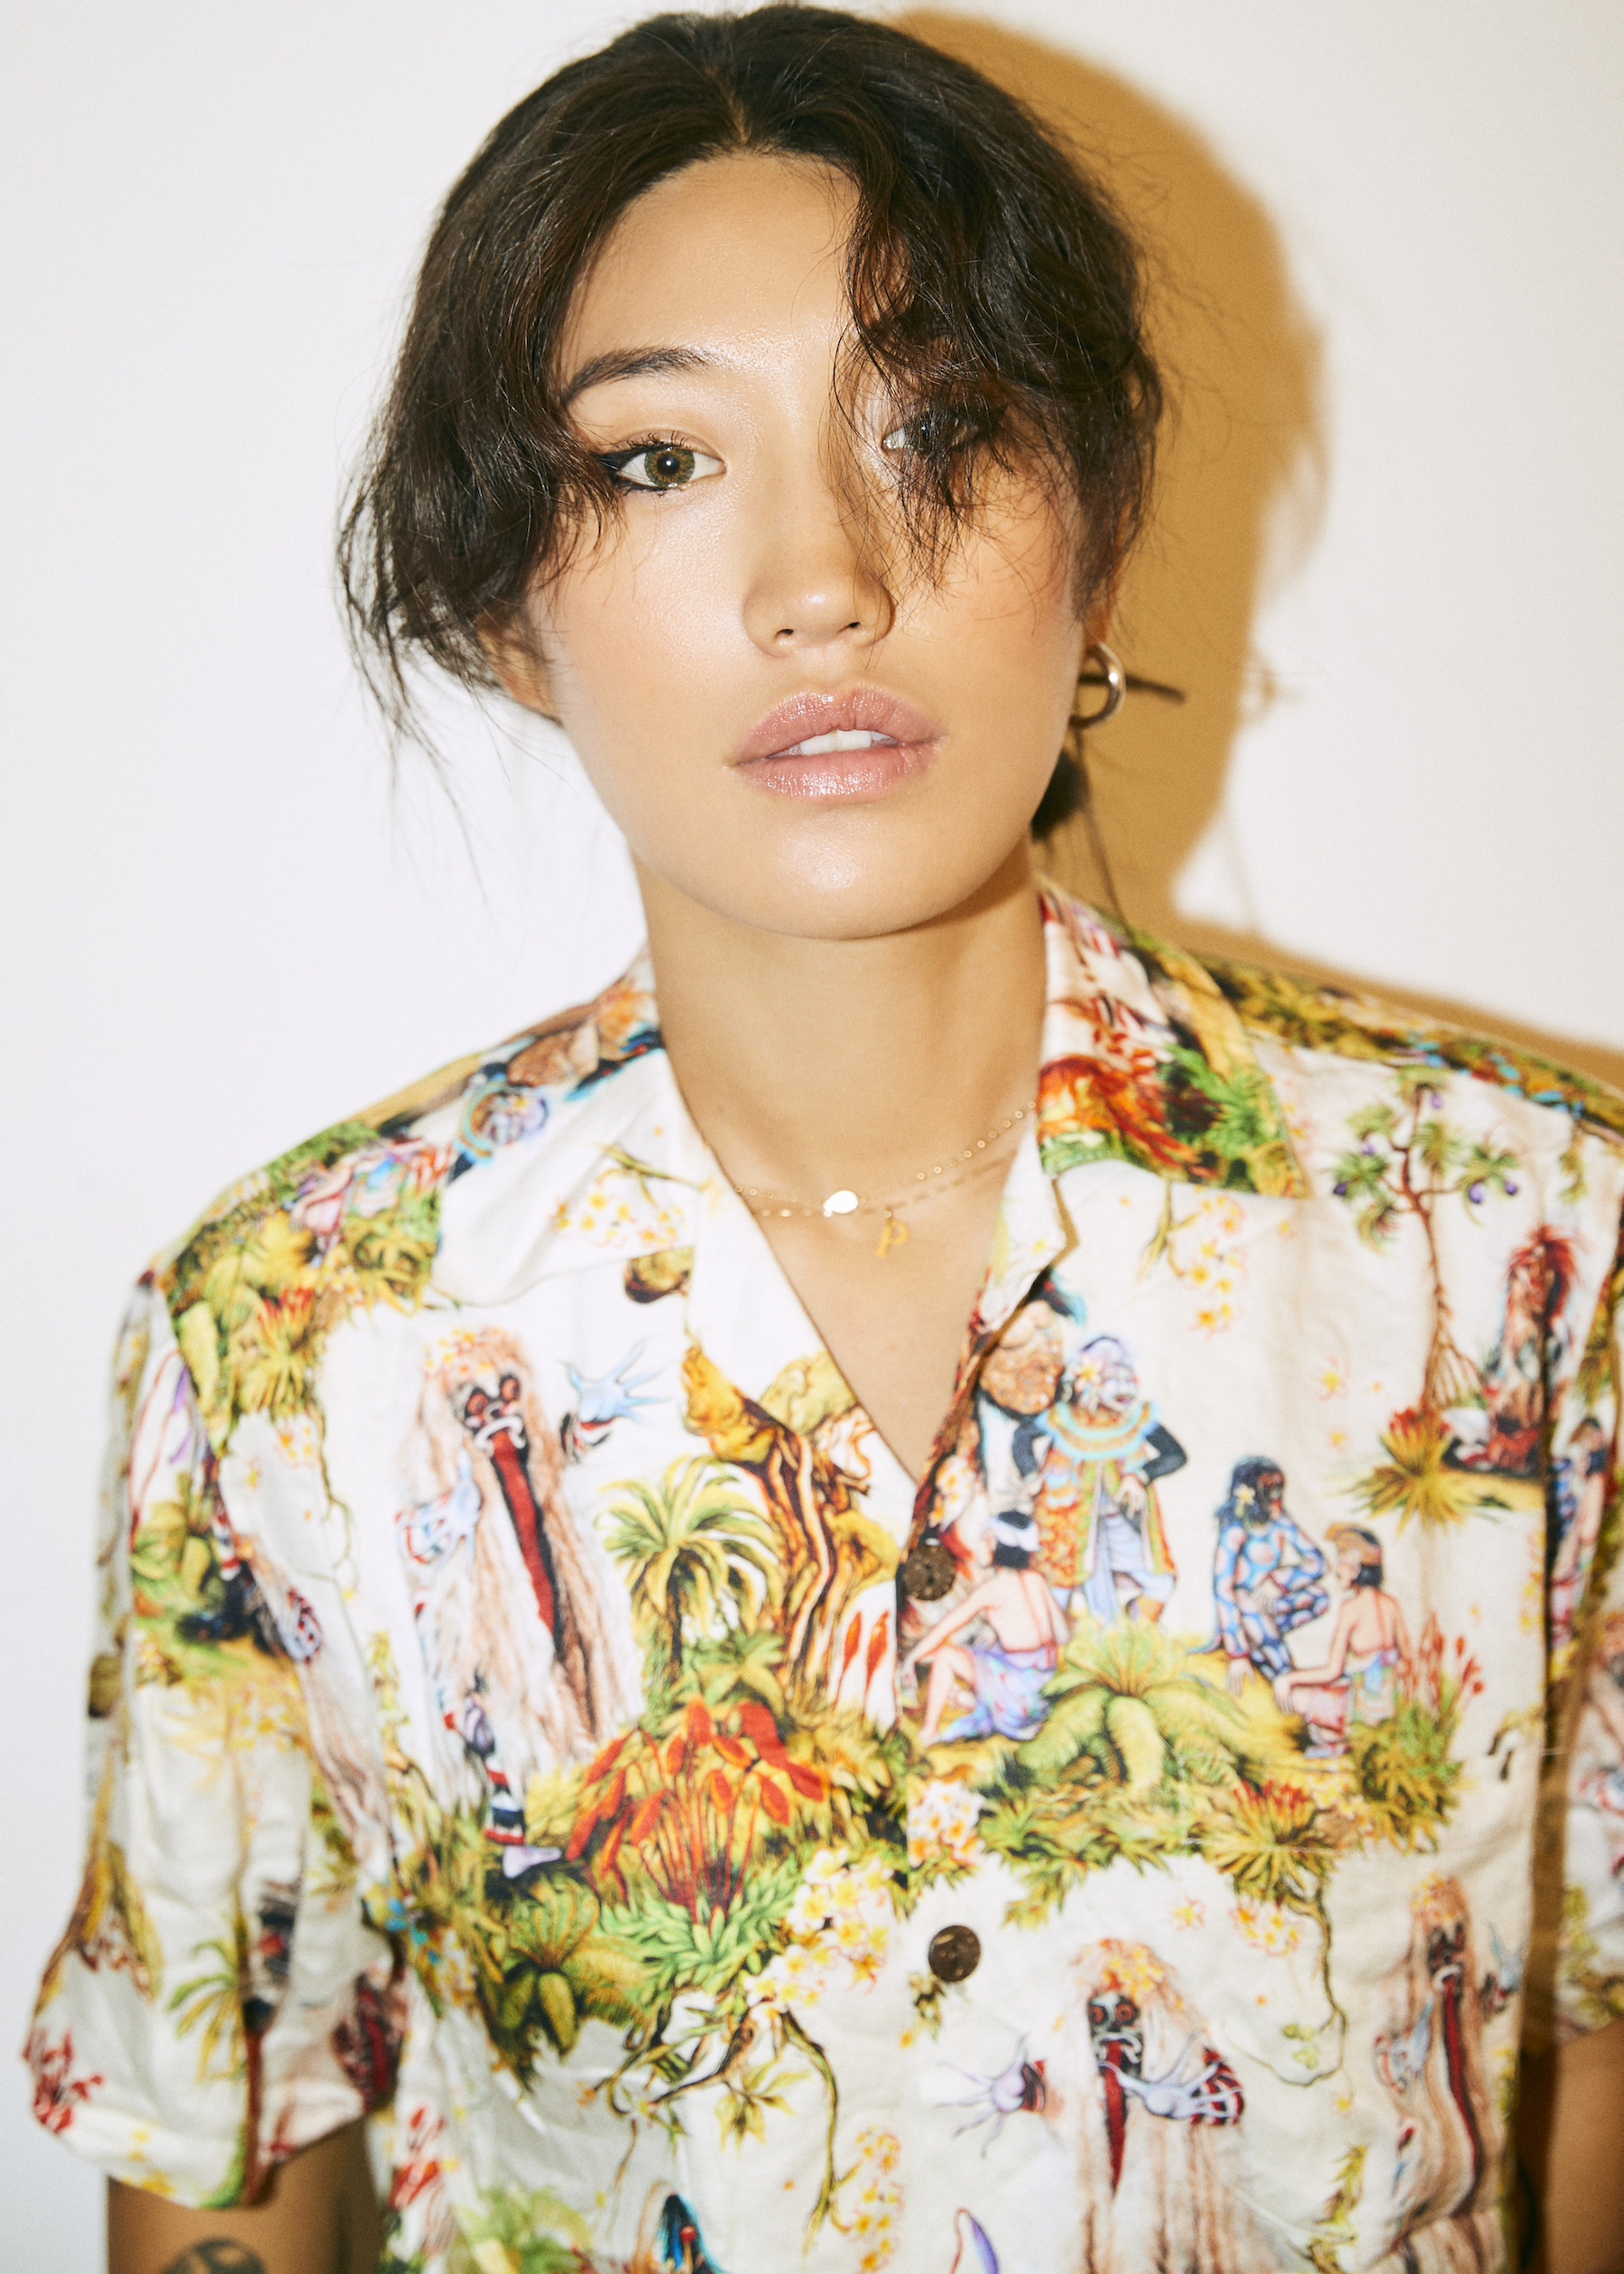 Not only techno: Style and outfit of Peggy Gou – Inzane Magazine